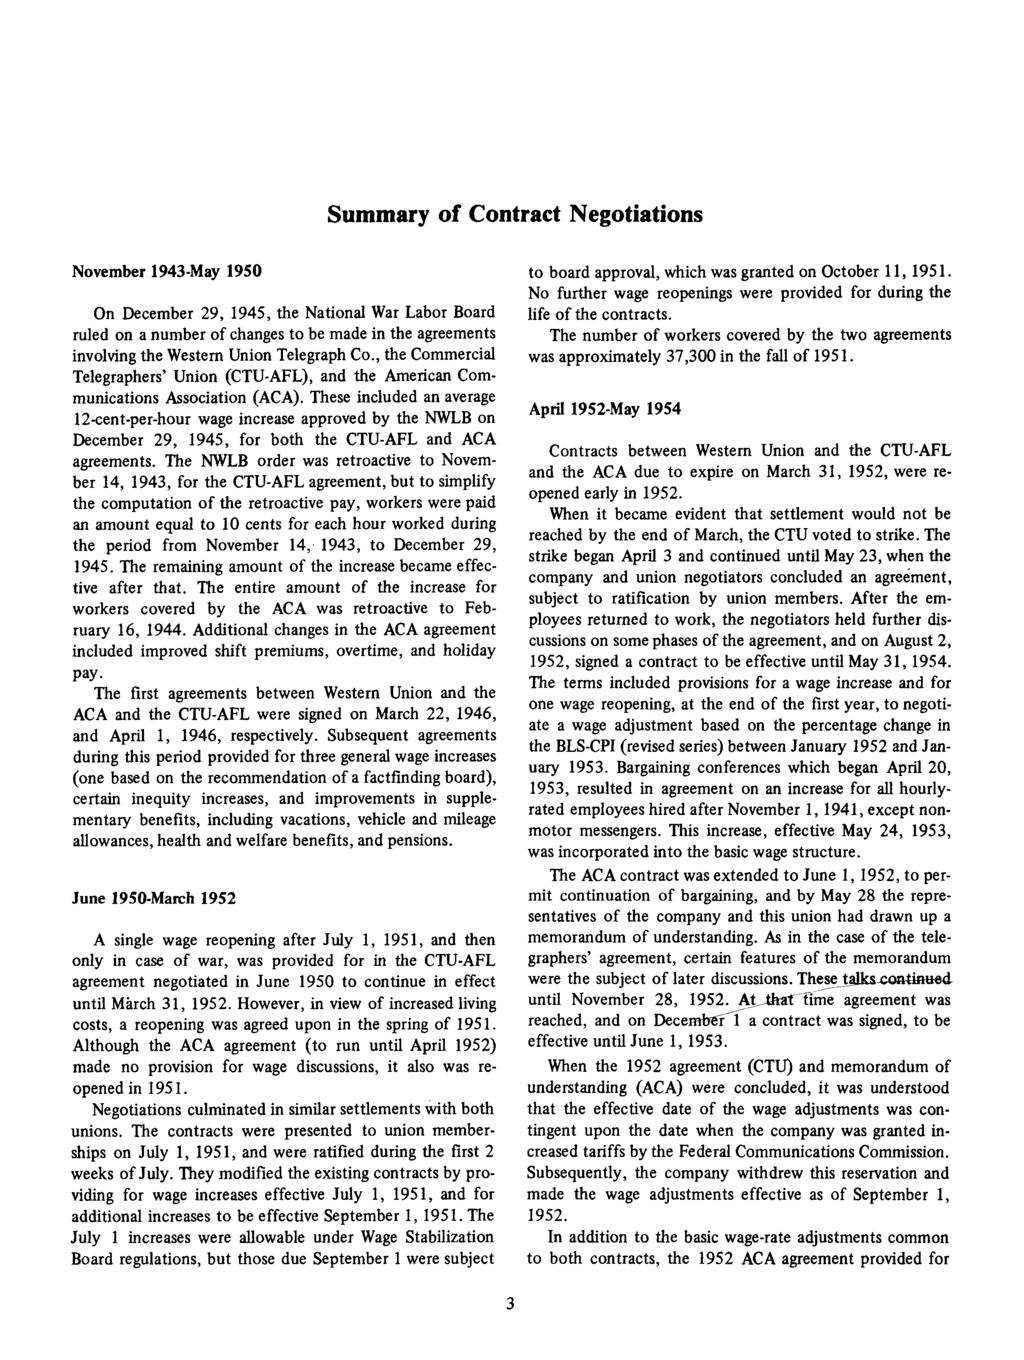 Summary of Contract Negotiations November 1943-May 1950 On December 29, 1945, the National War Labor Board ruled on a number of changes to be made in the agreements involving the Western Union